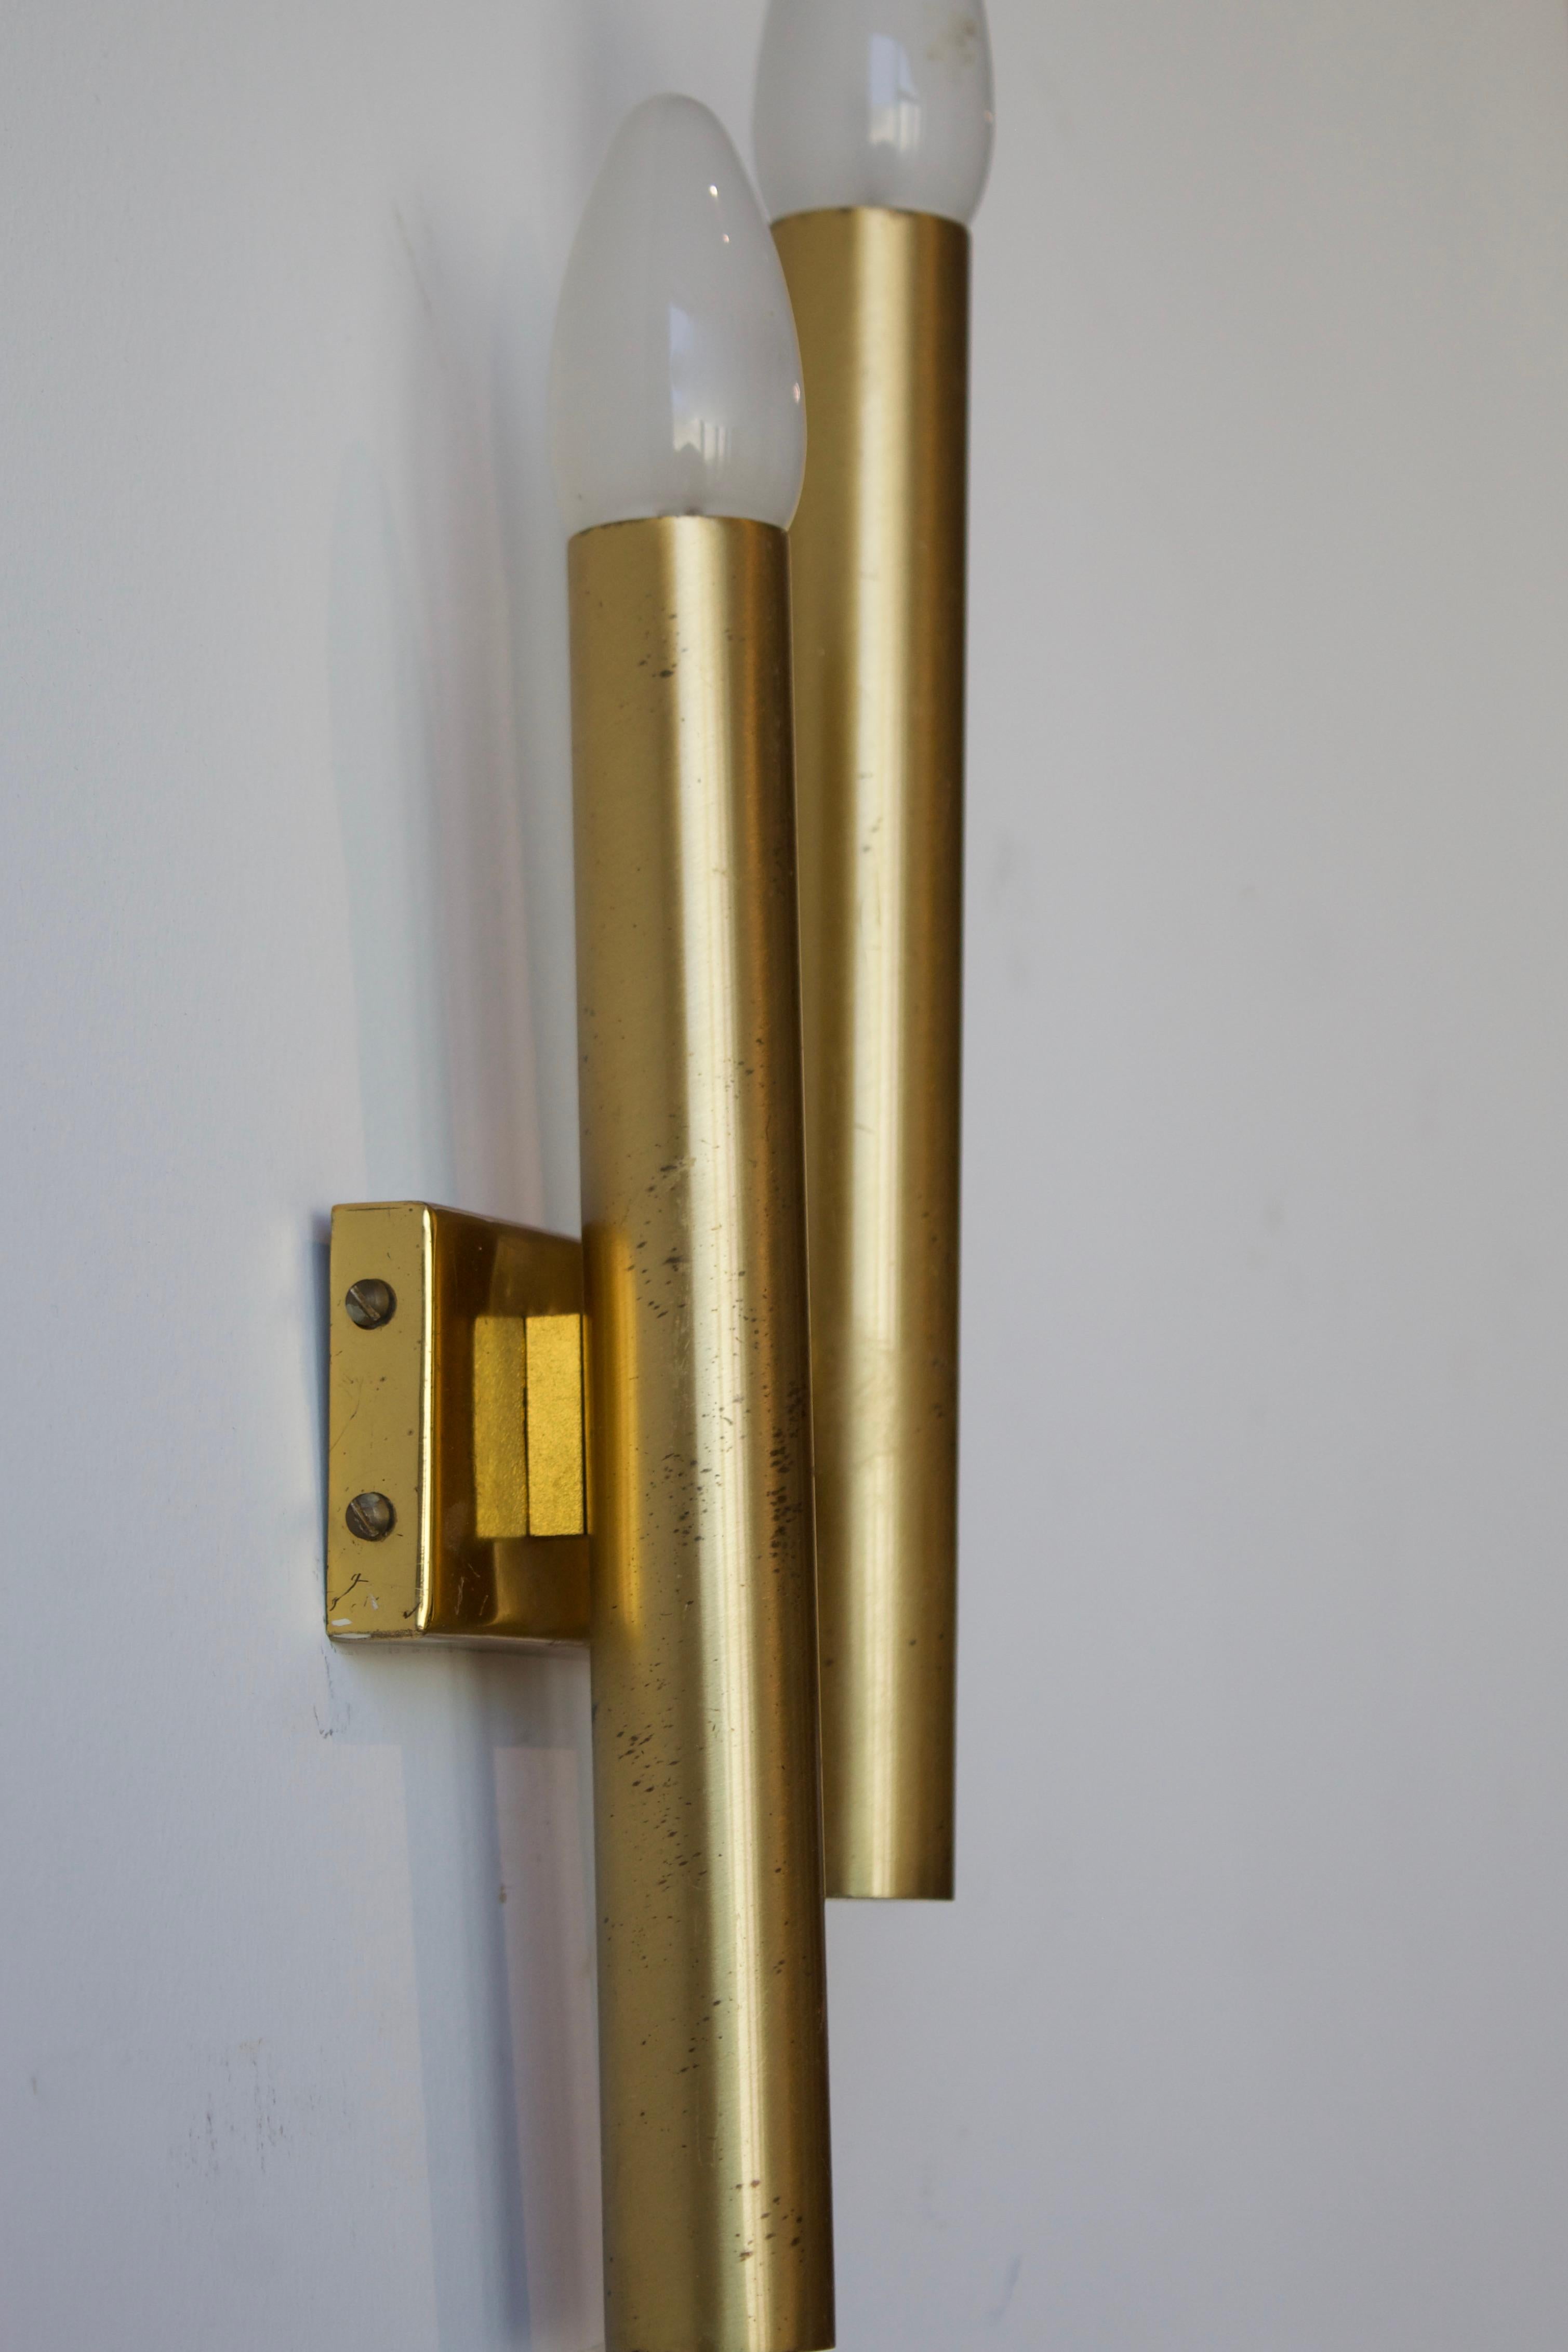 Italian Candle, Two-Armed Wall Lights / Sconces, Brass, Italy, 1960s For Sale